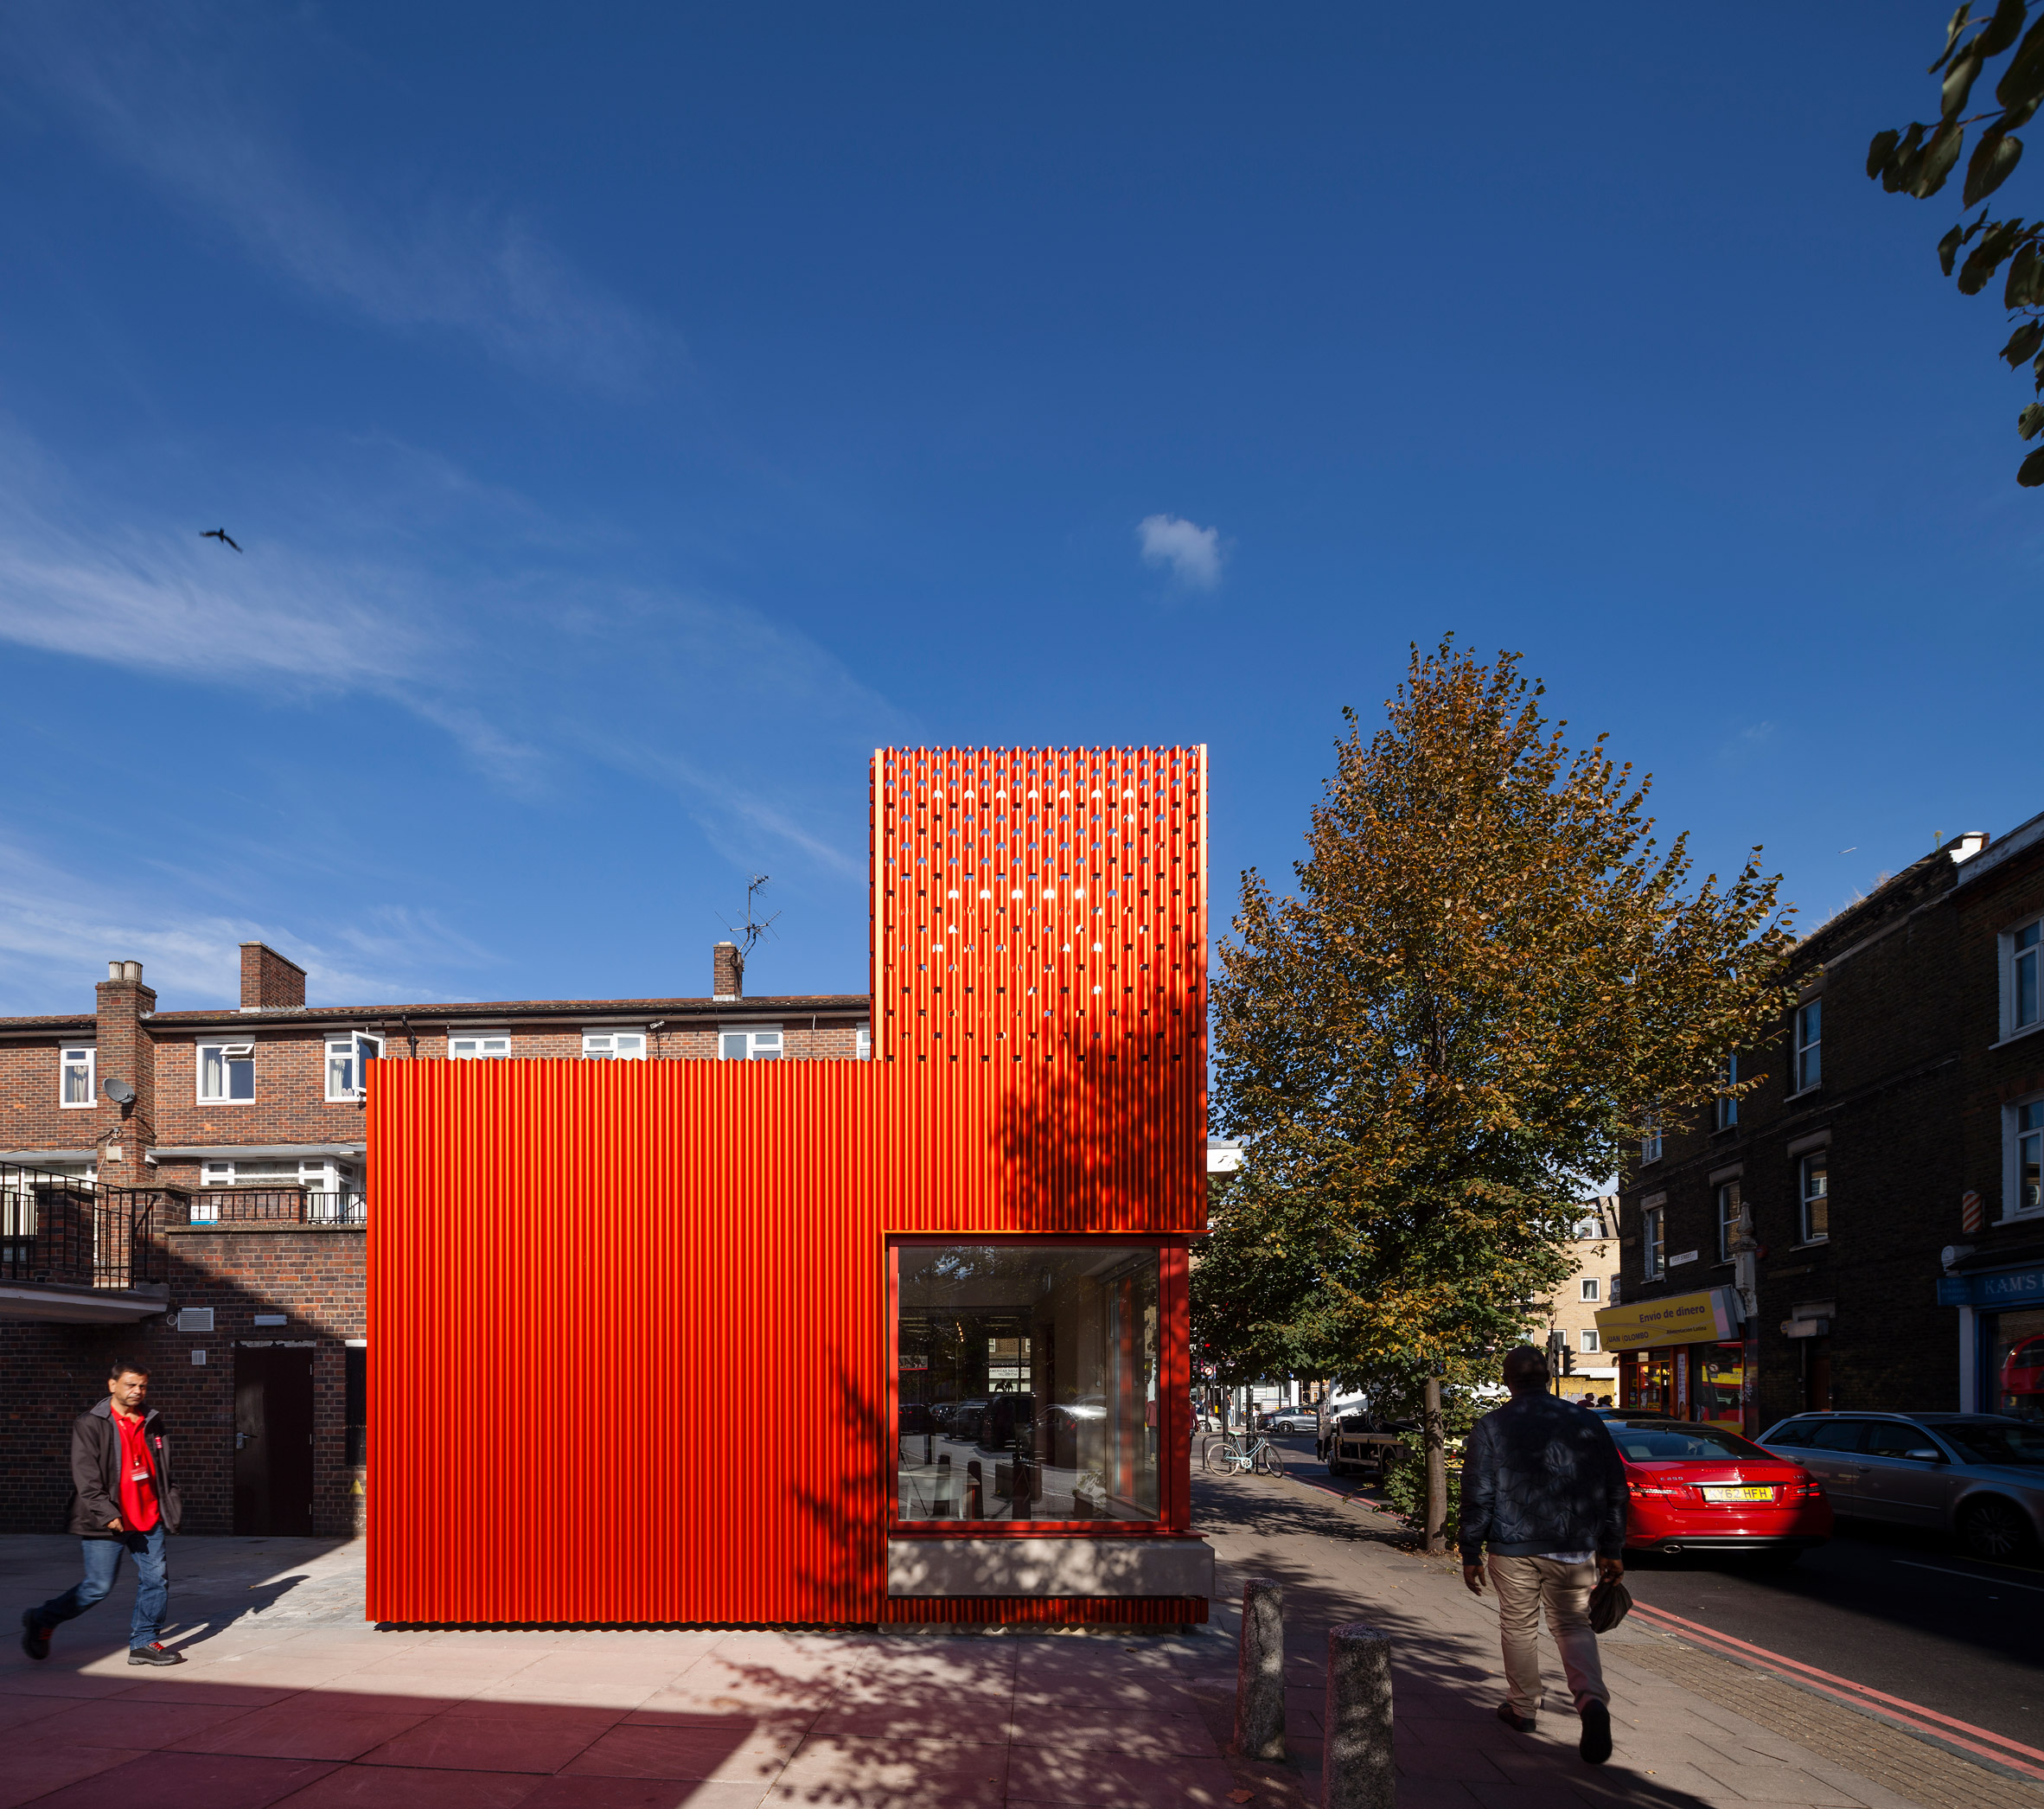 East Street Exchange by We Made That